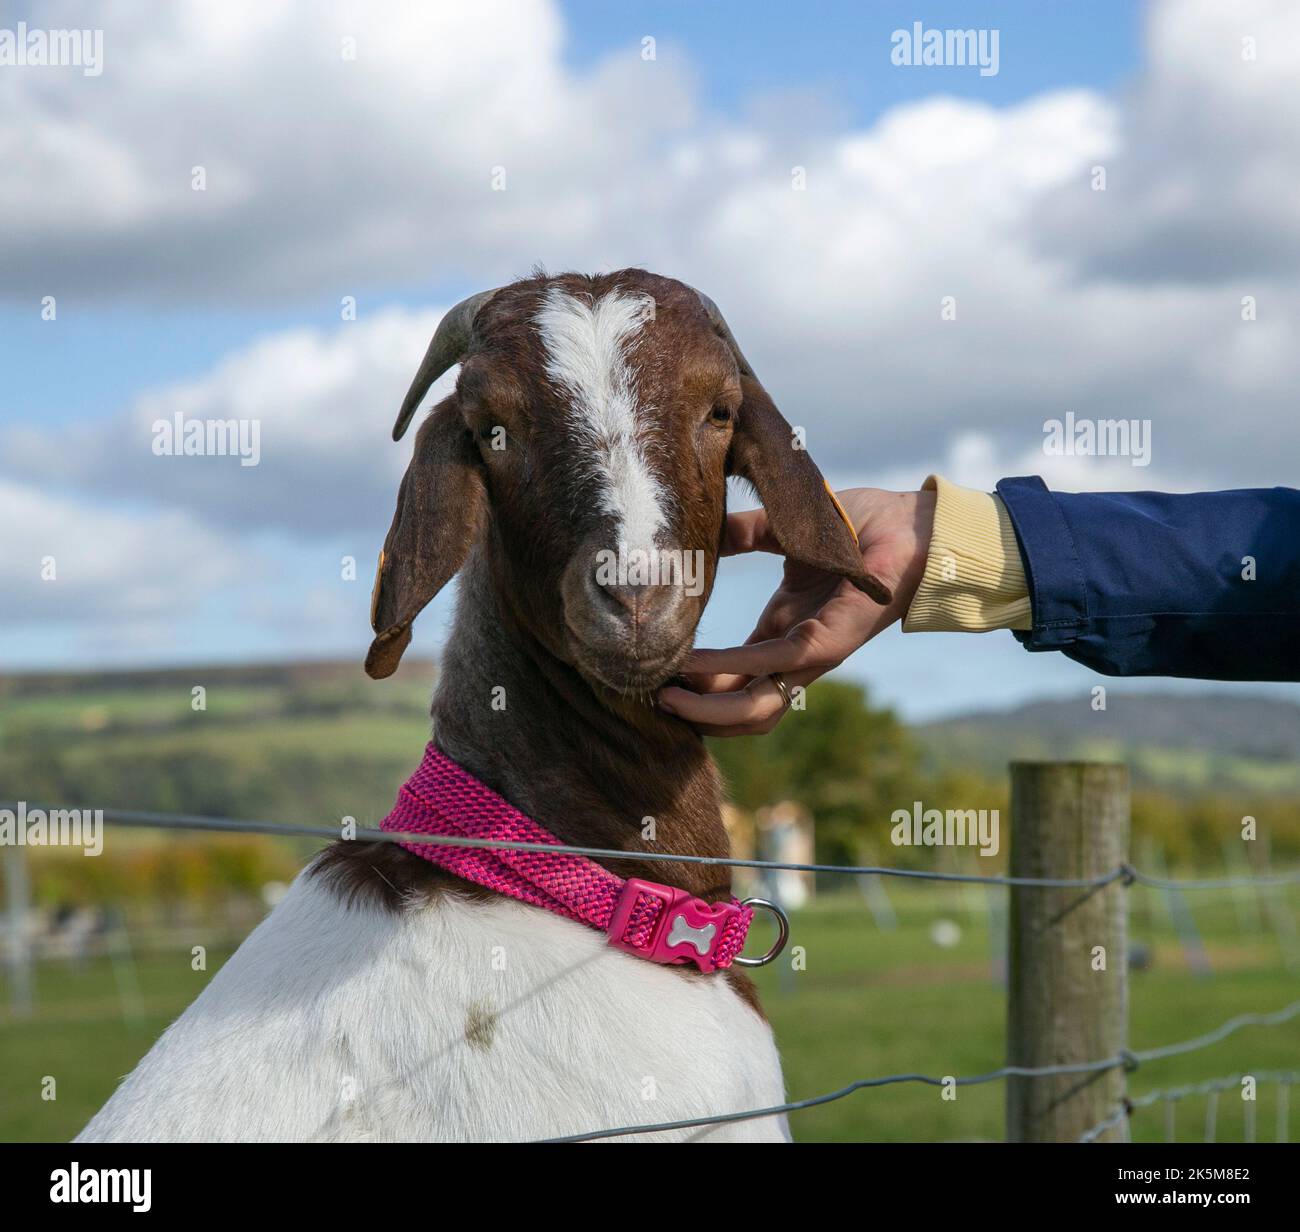 A hand reaches out to pet a Pygmy Goat Stock Photo